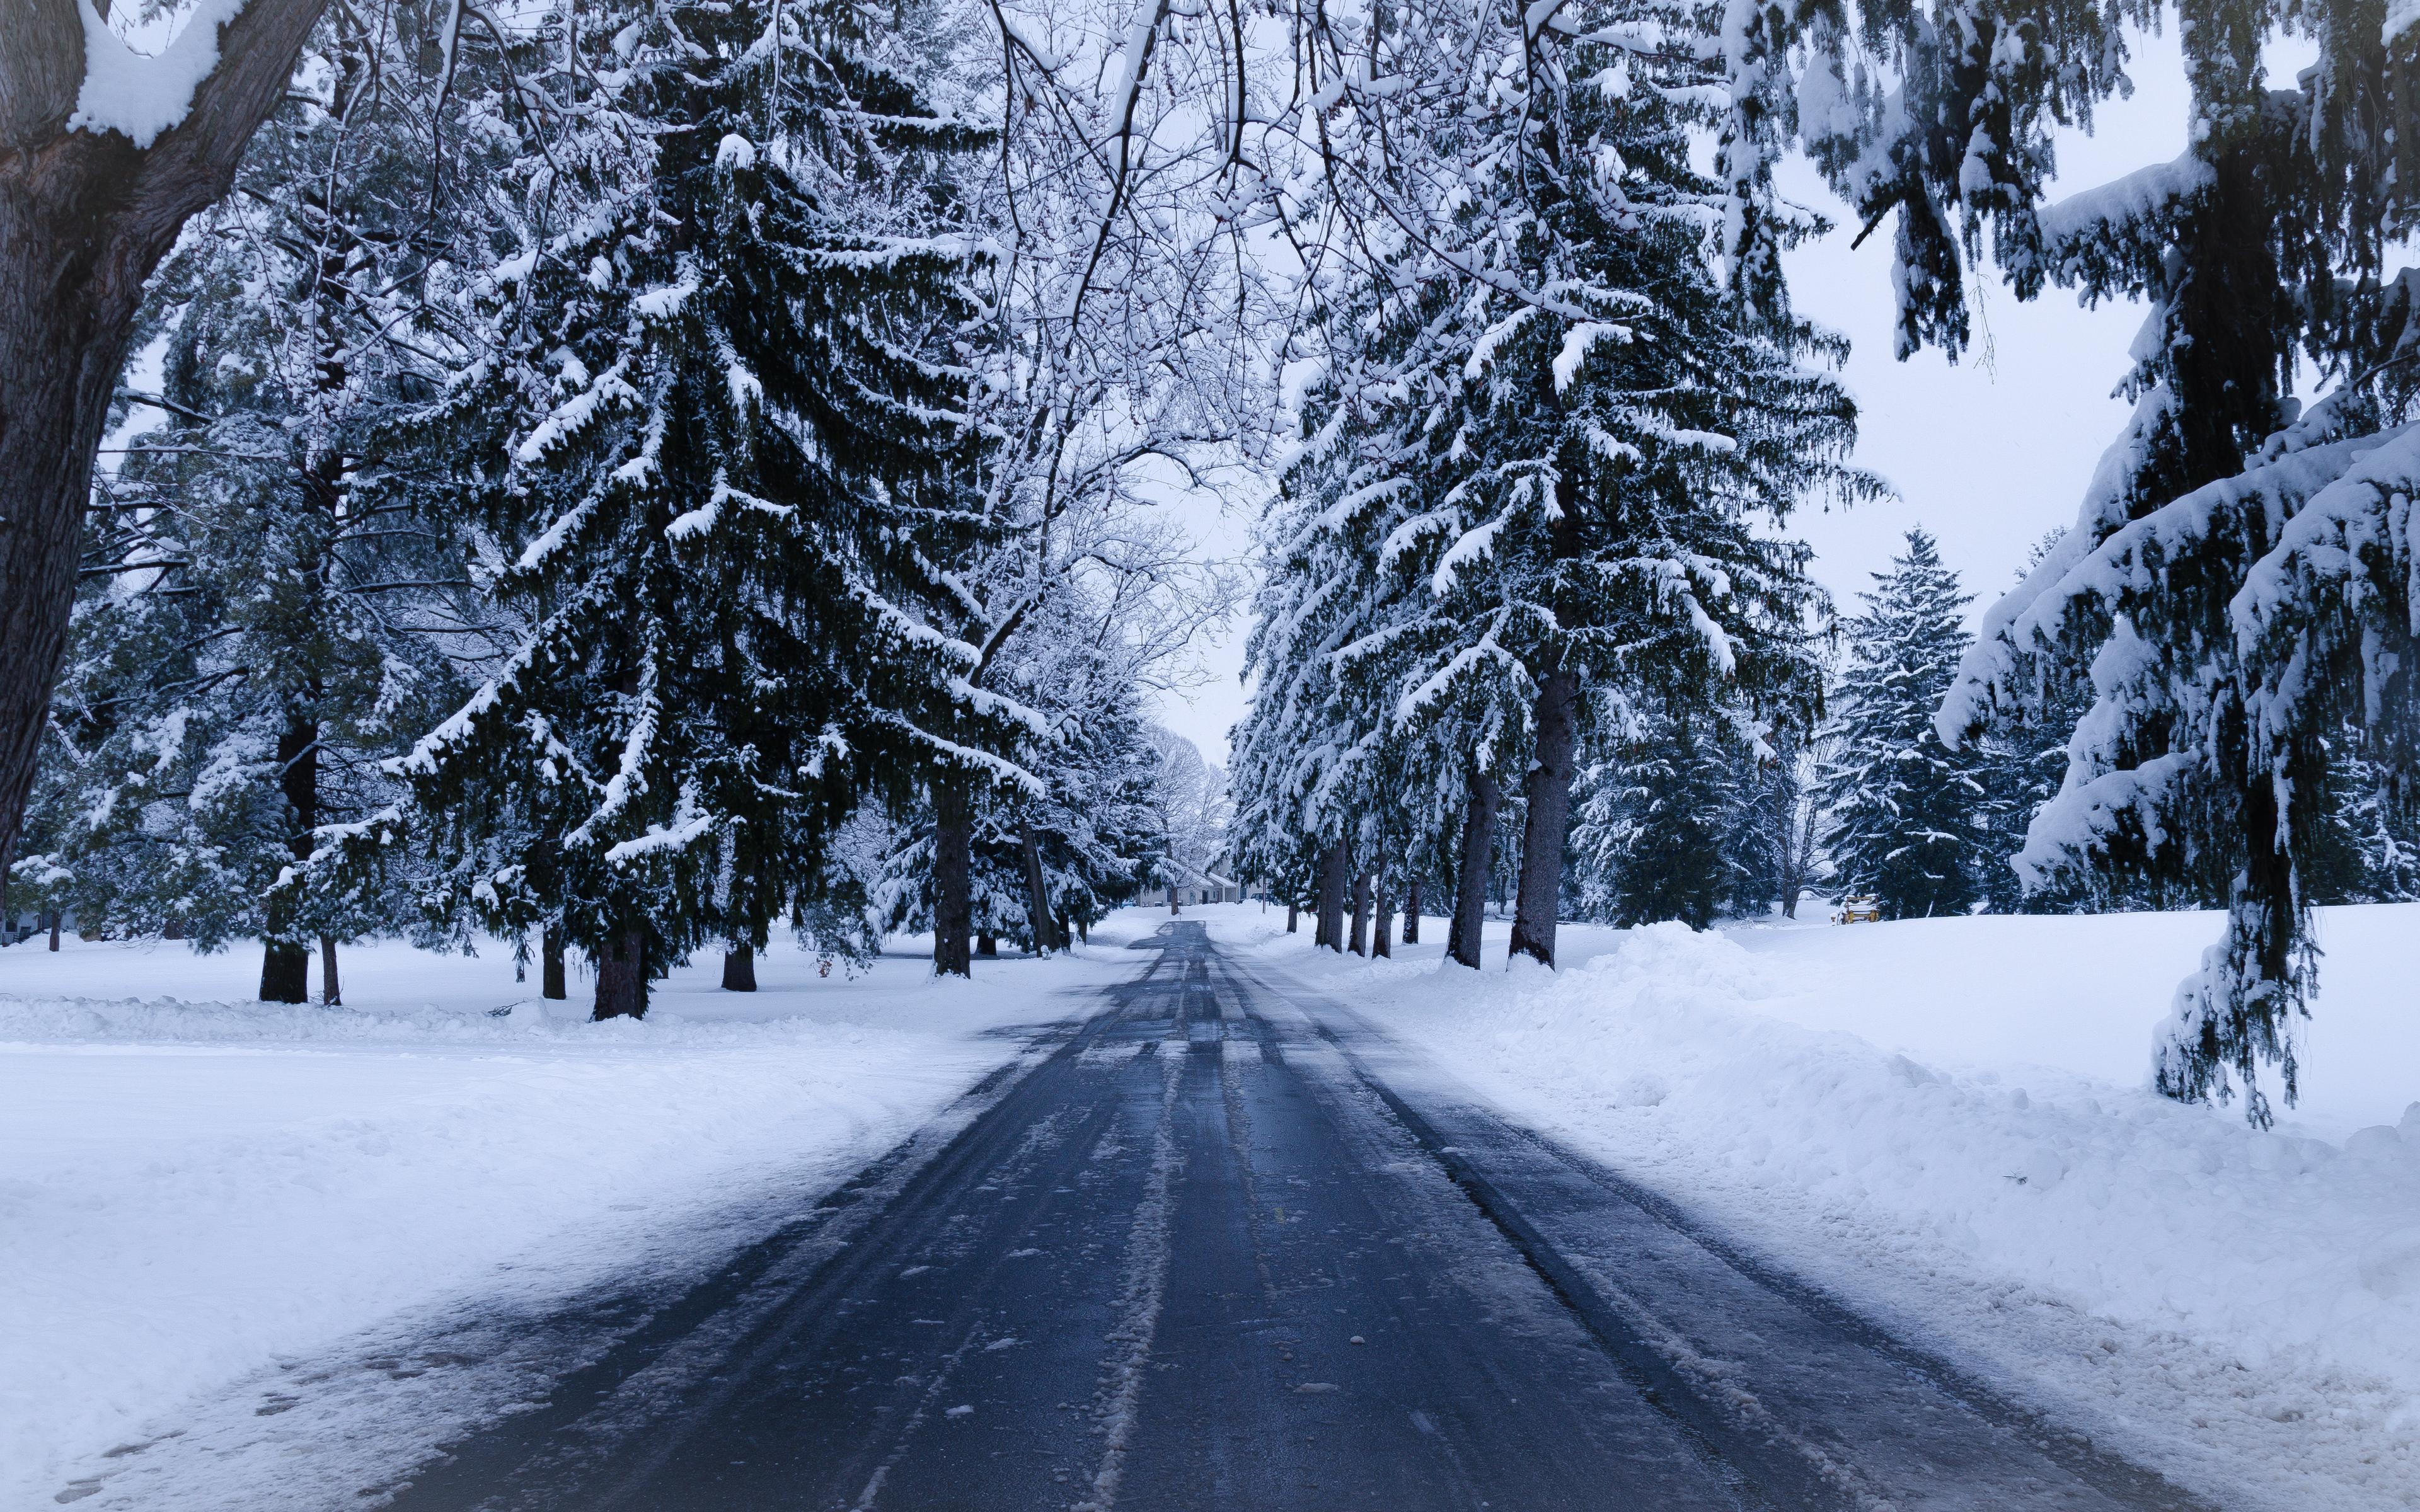 Download wallpapers 3840x2400 winter, road, snow, trees